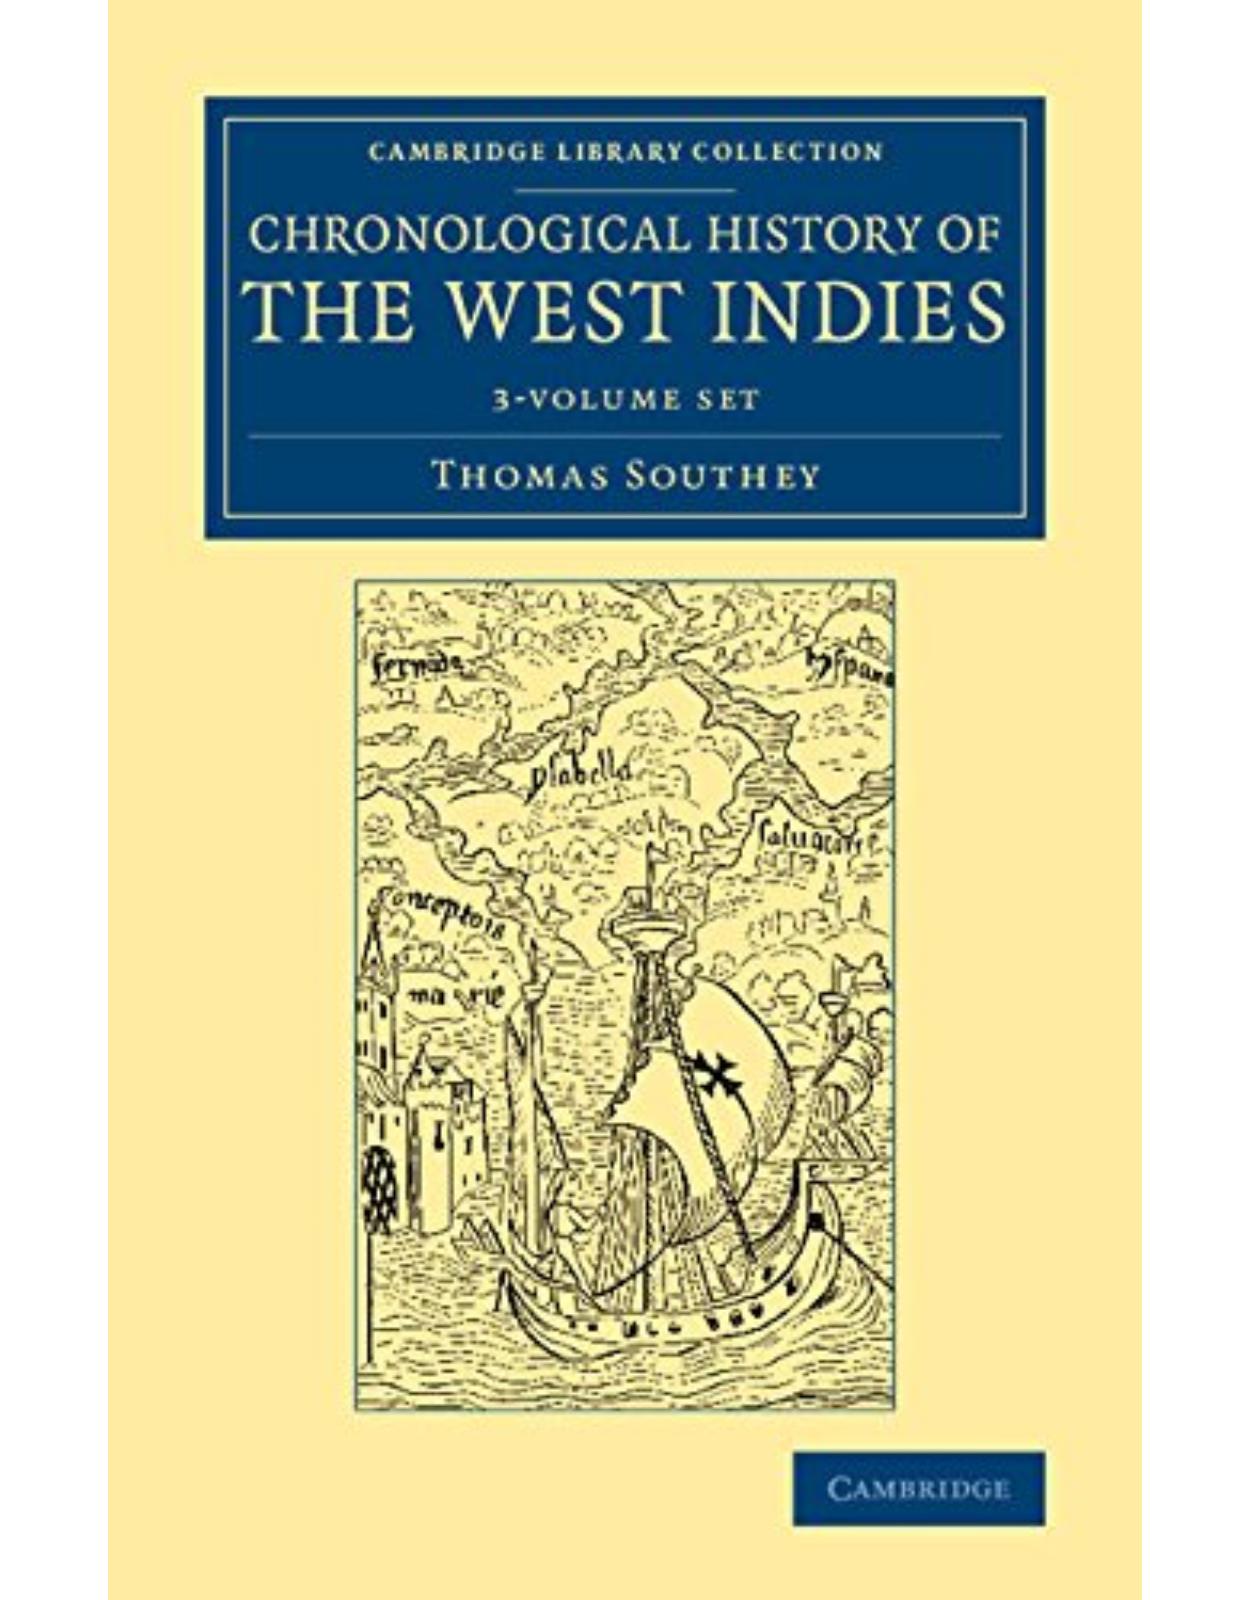 Chronological History of the West Indies 3 Volume Set (Cambridge Library Collection - North American History)